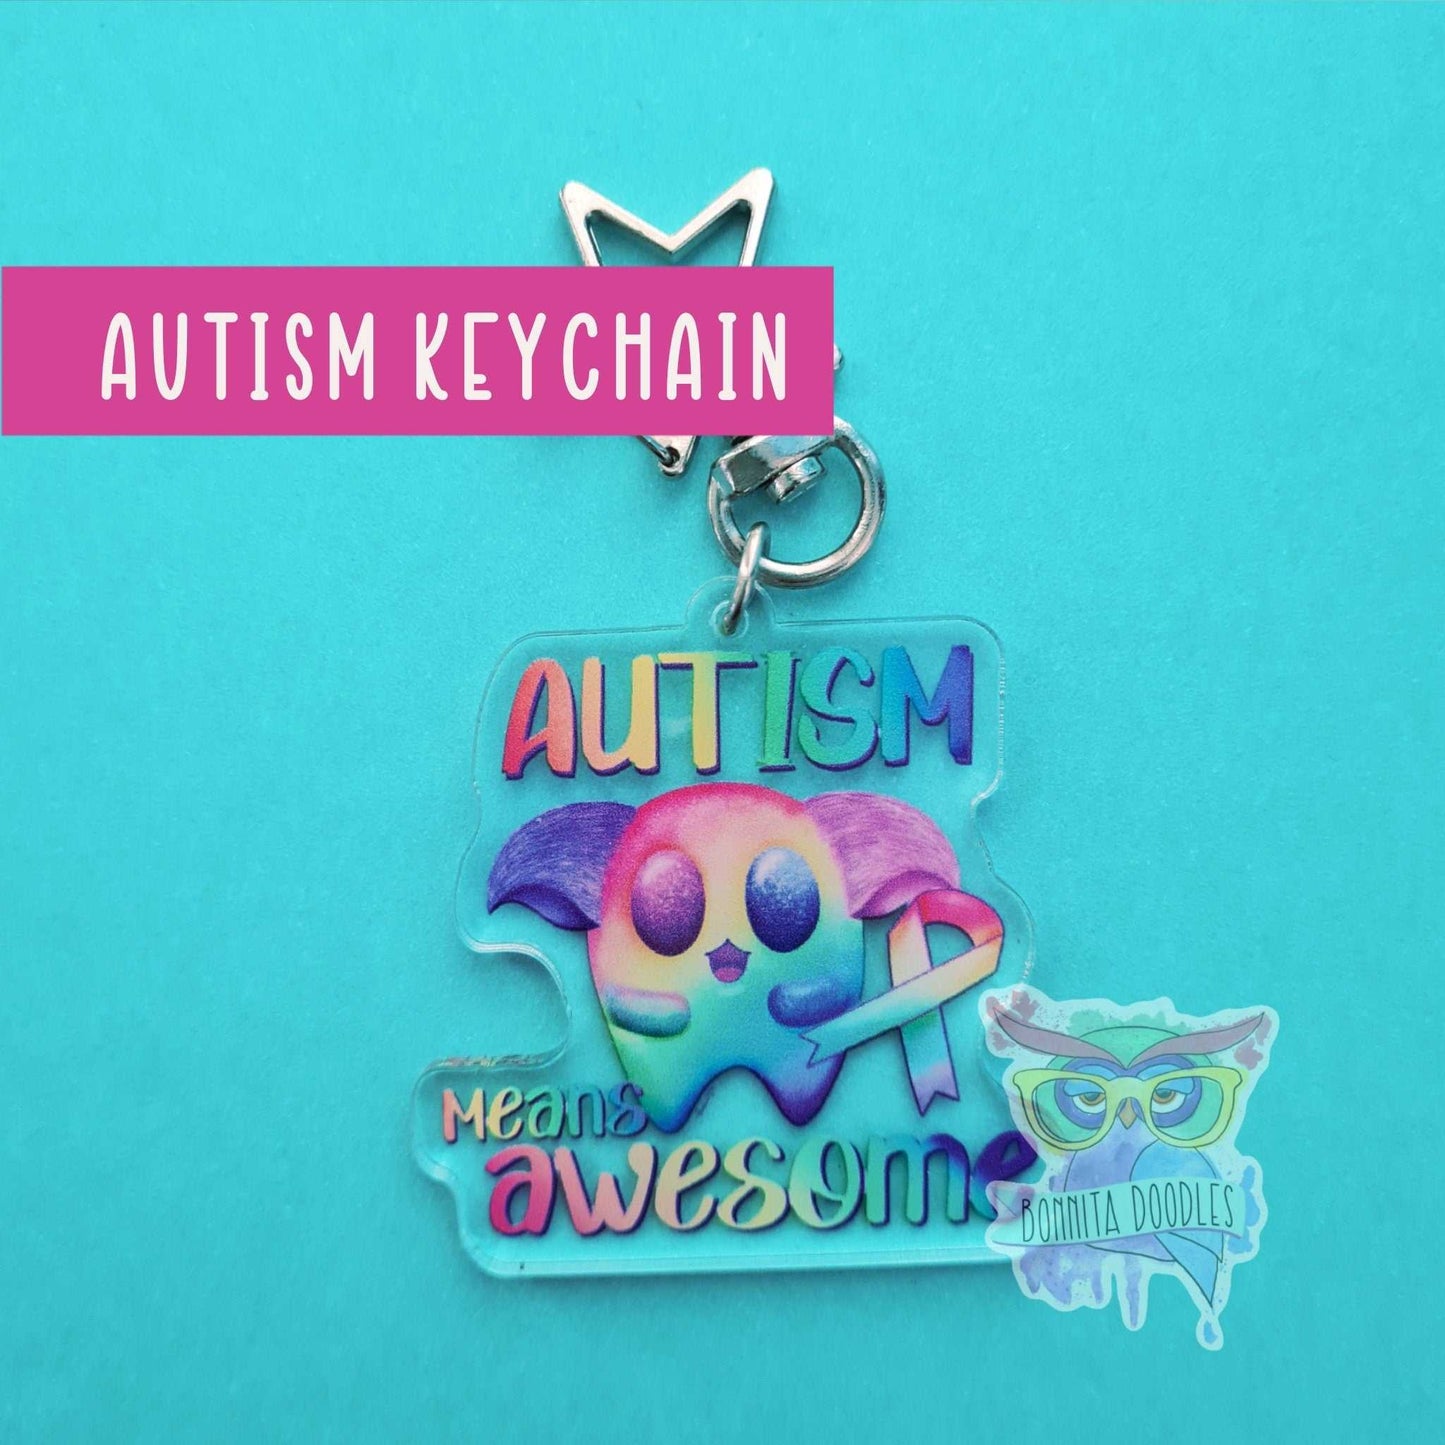 Autism awareness key chain. Autism, Spectrum disorder and care card